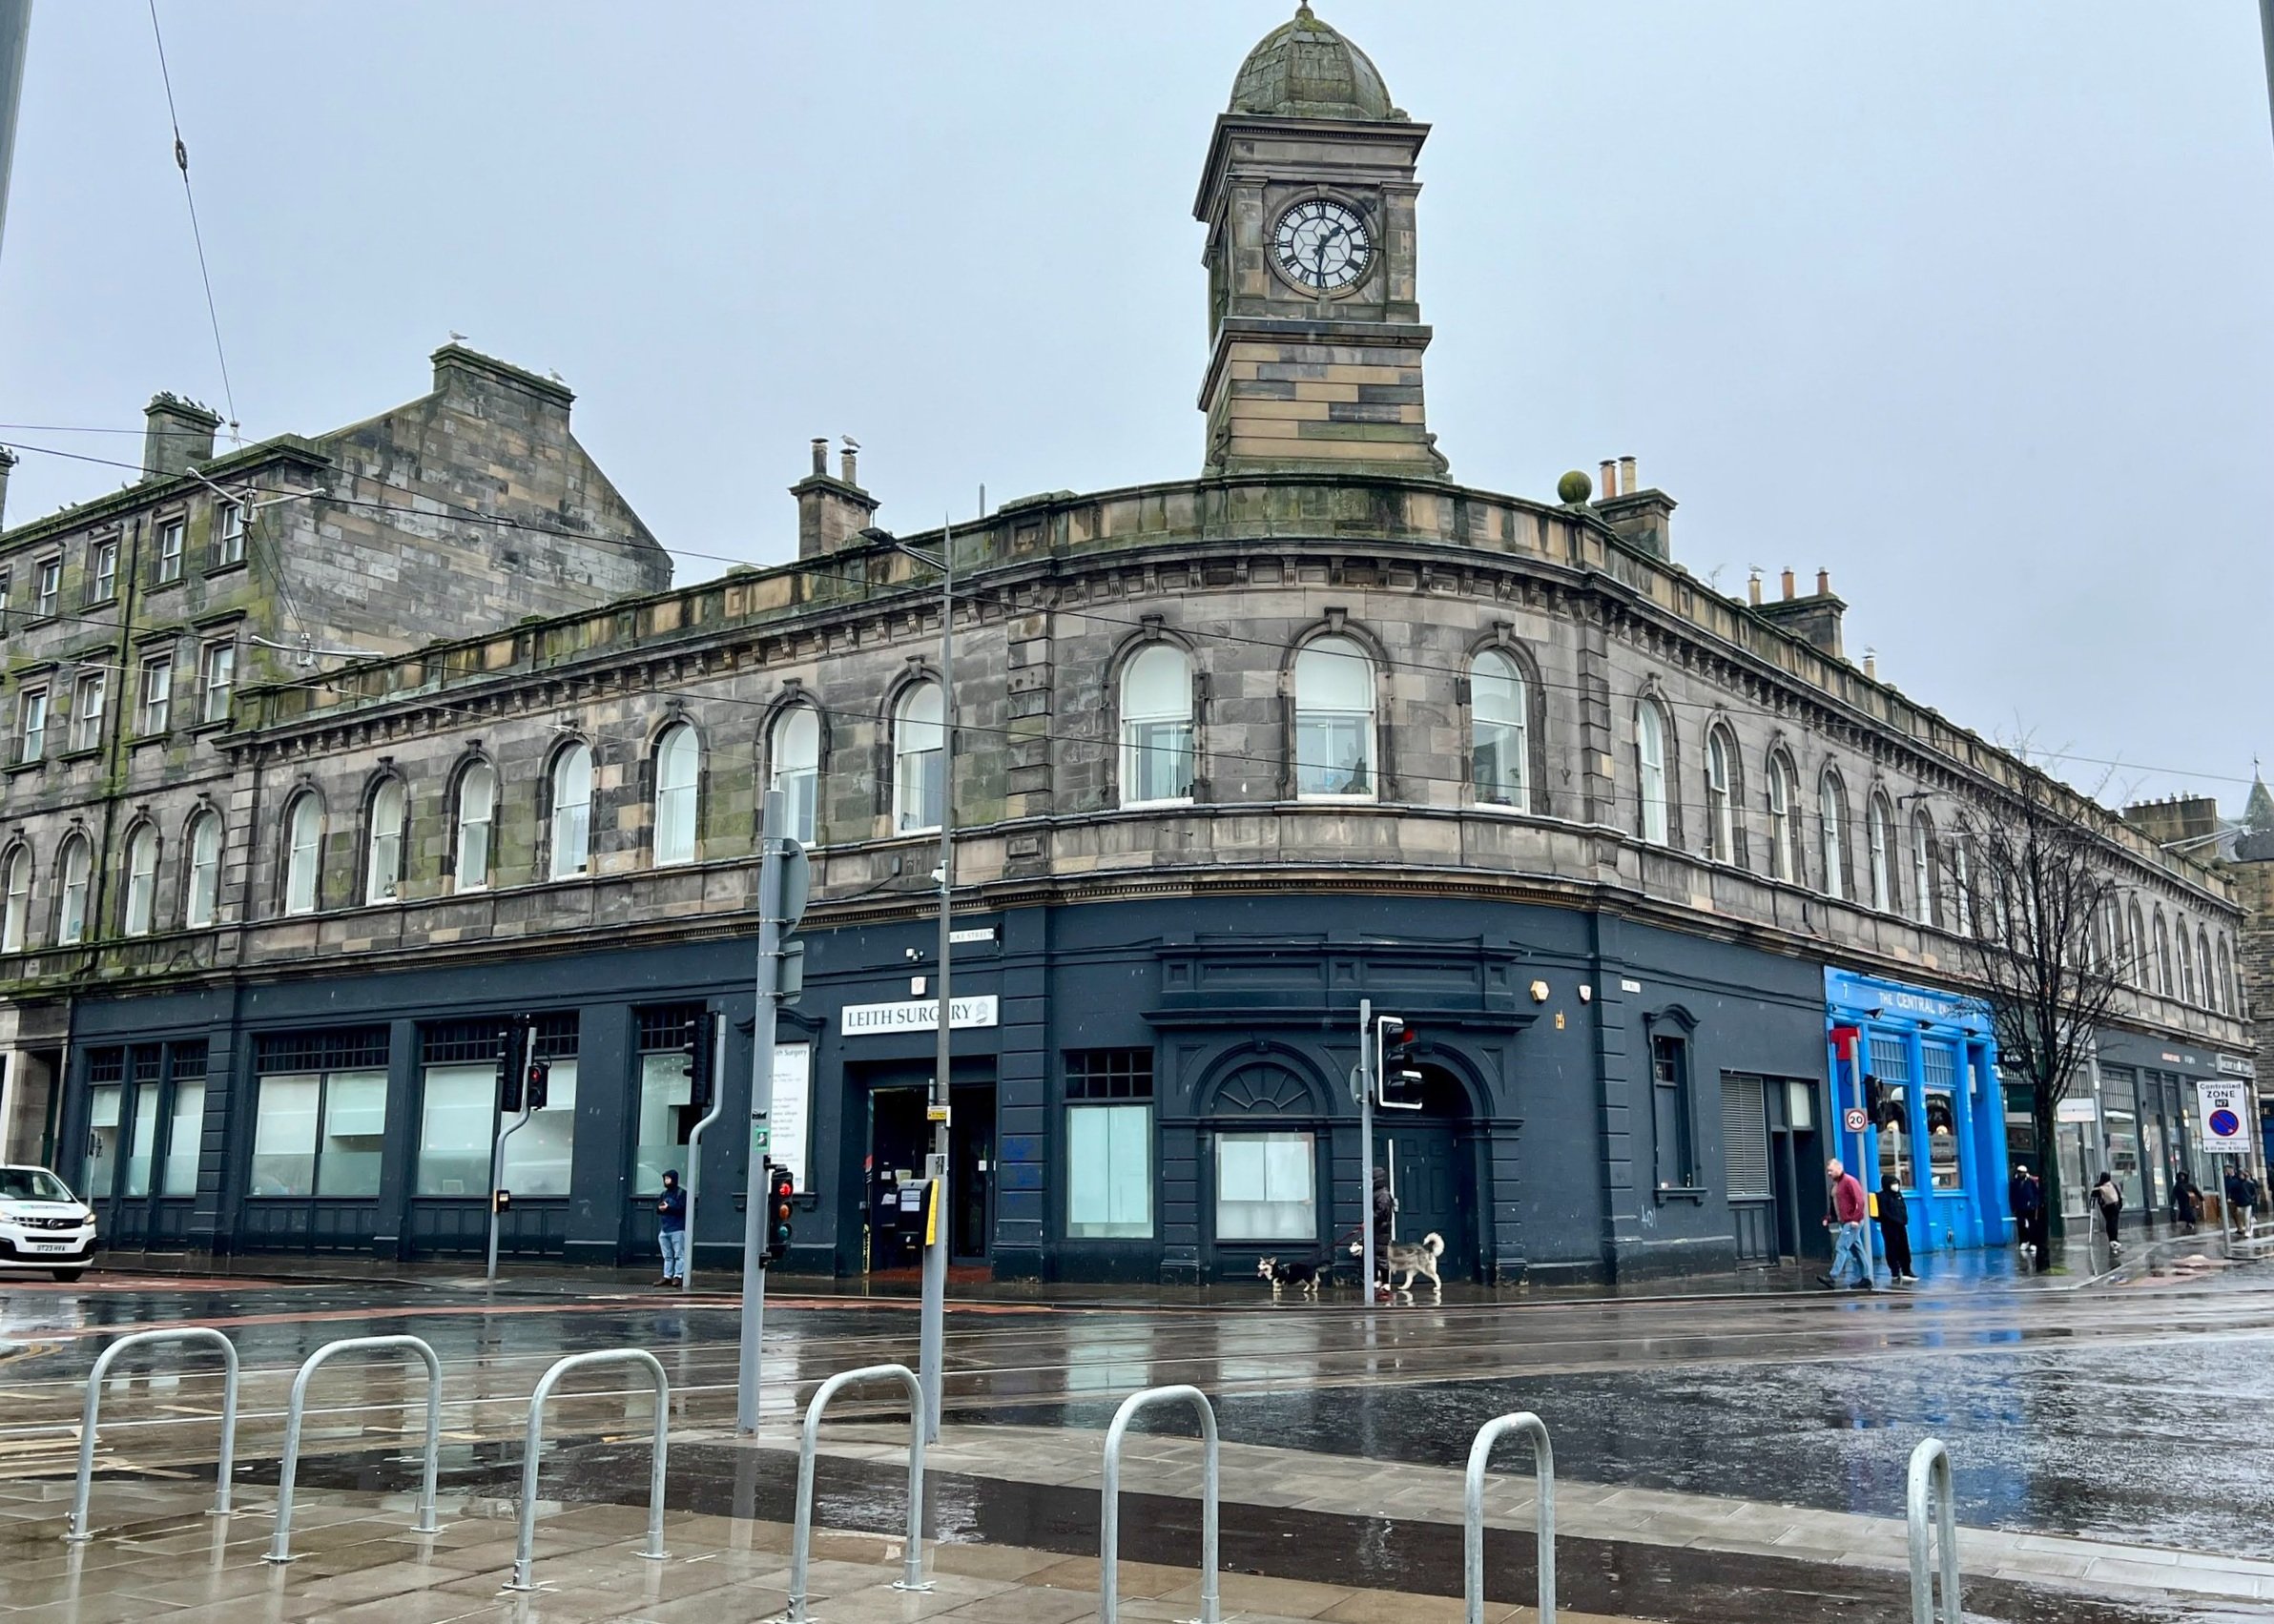  The former Leith Central Railway Station that is connected to the Trainspotting novel and film  